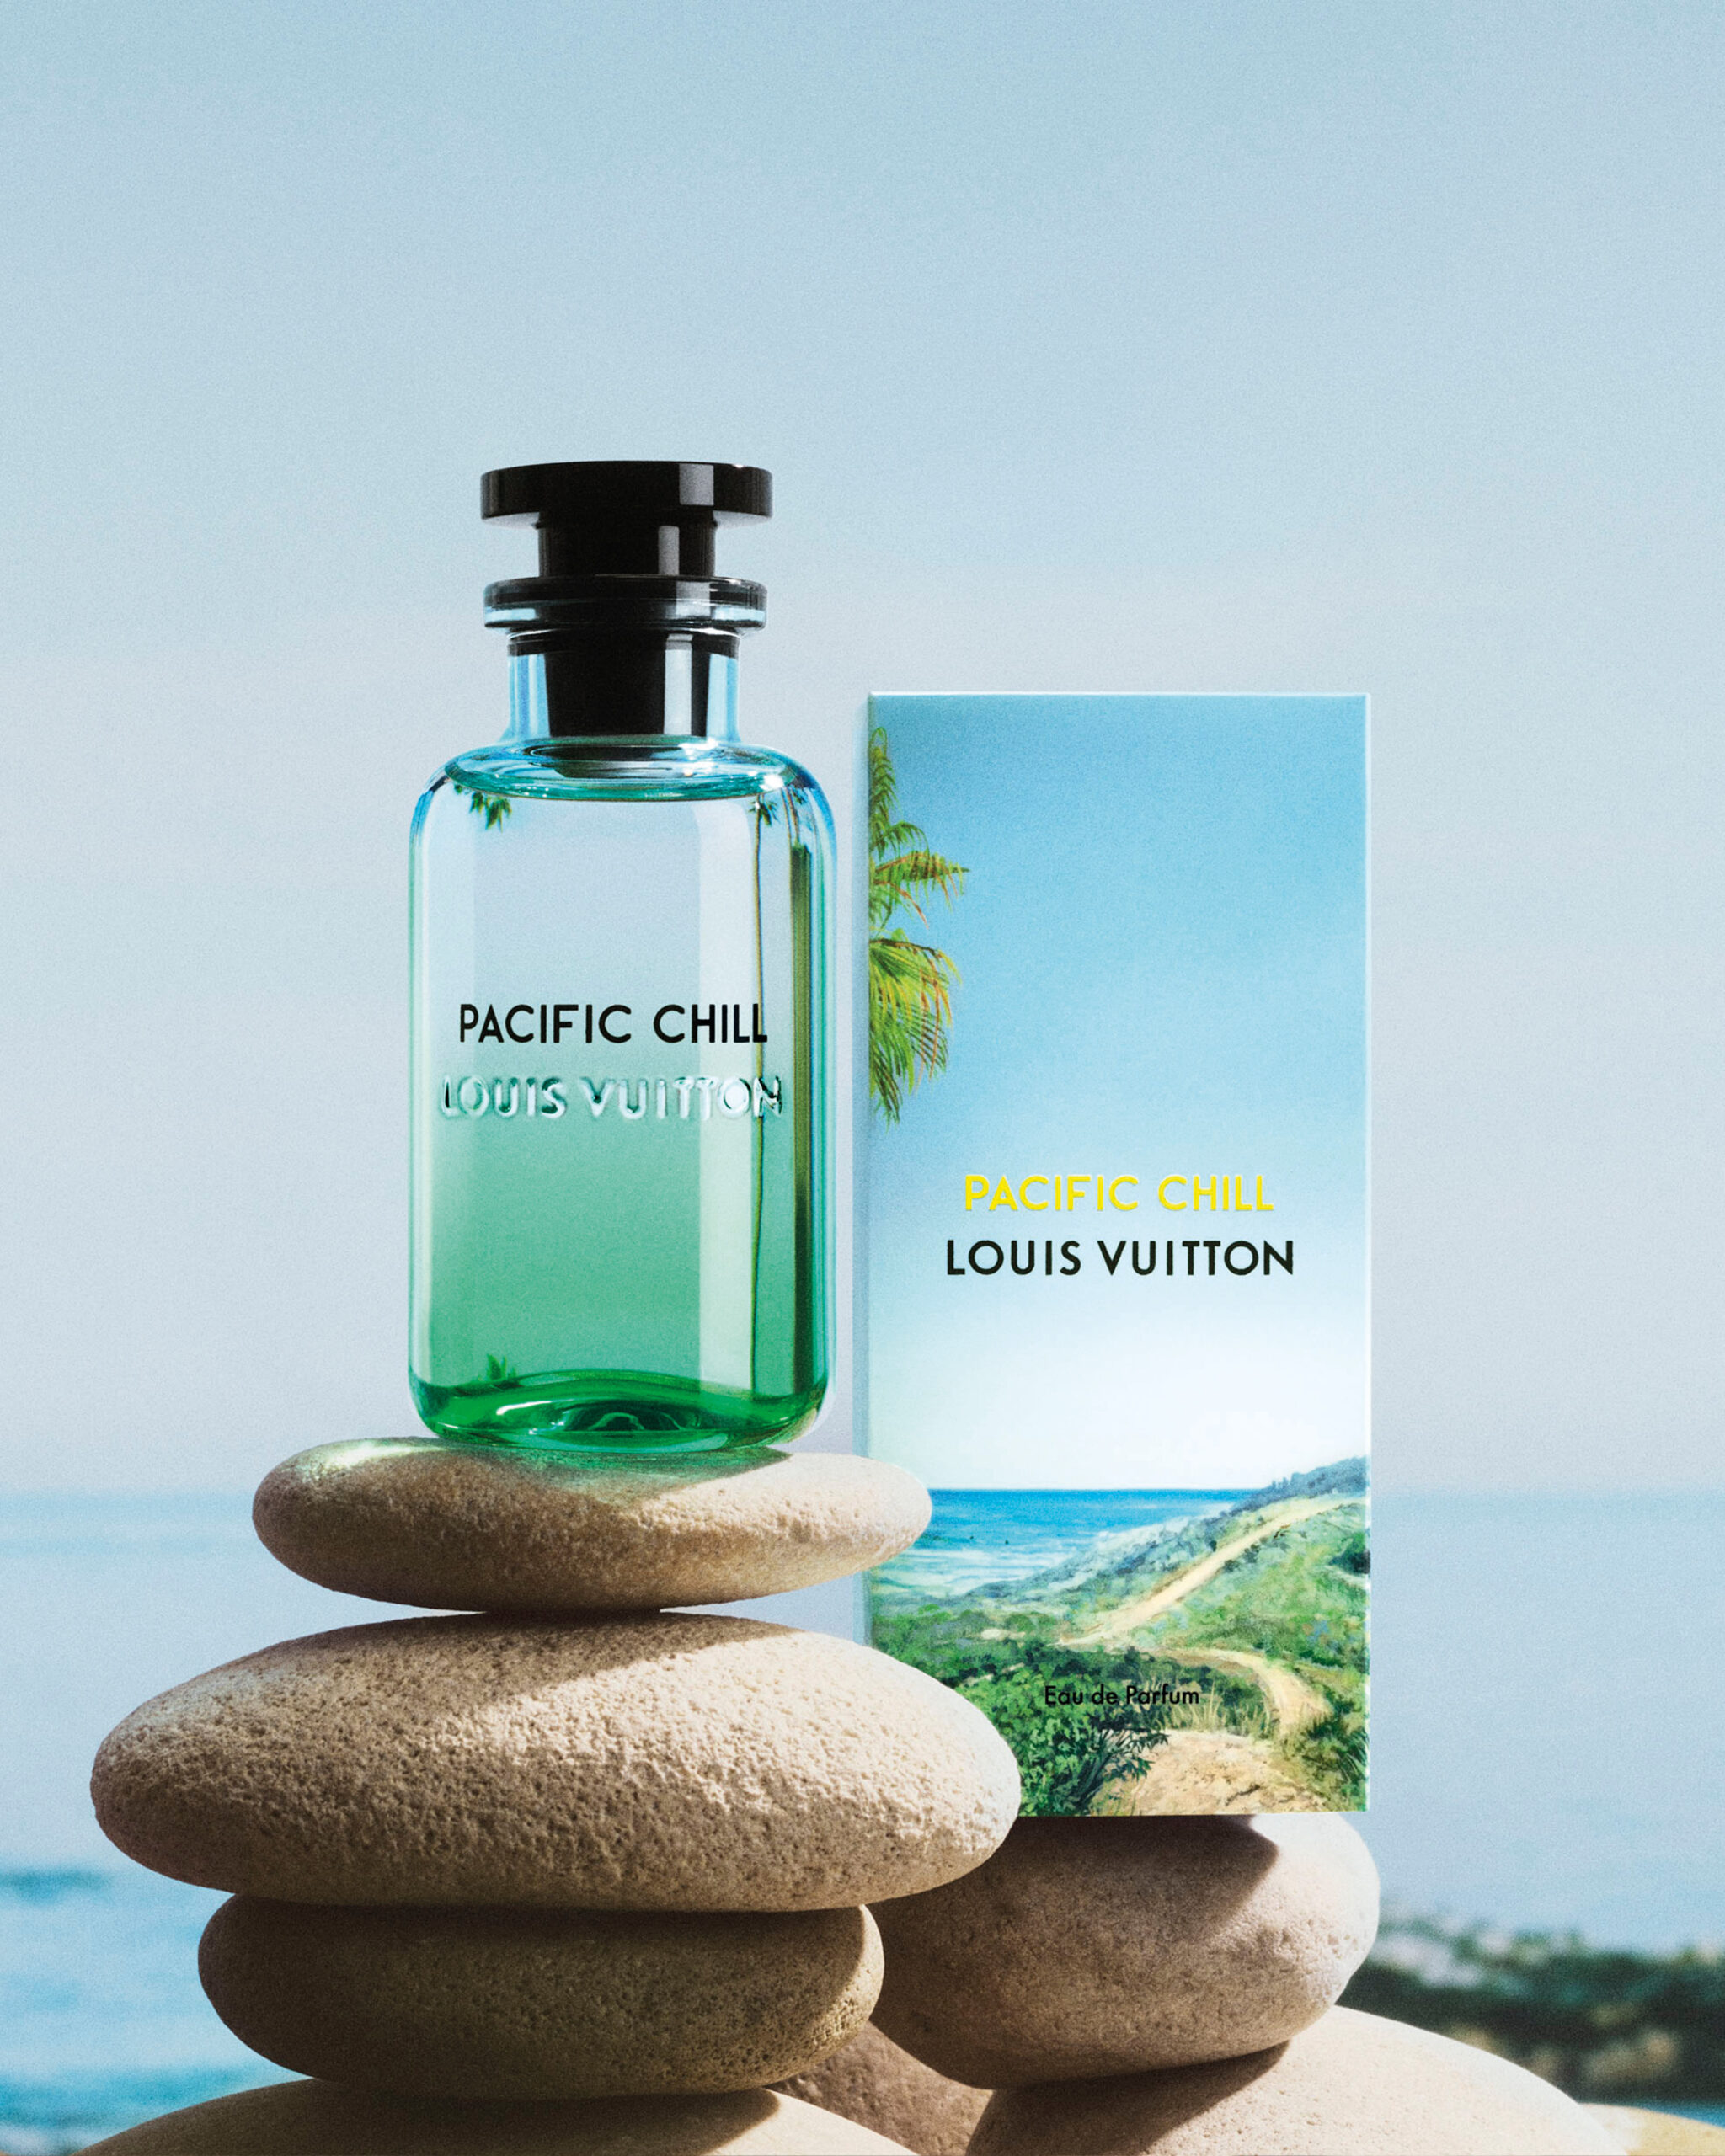 Meet 'Pacific Chill': Louis Vuitton's Latest Addition to Its